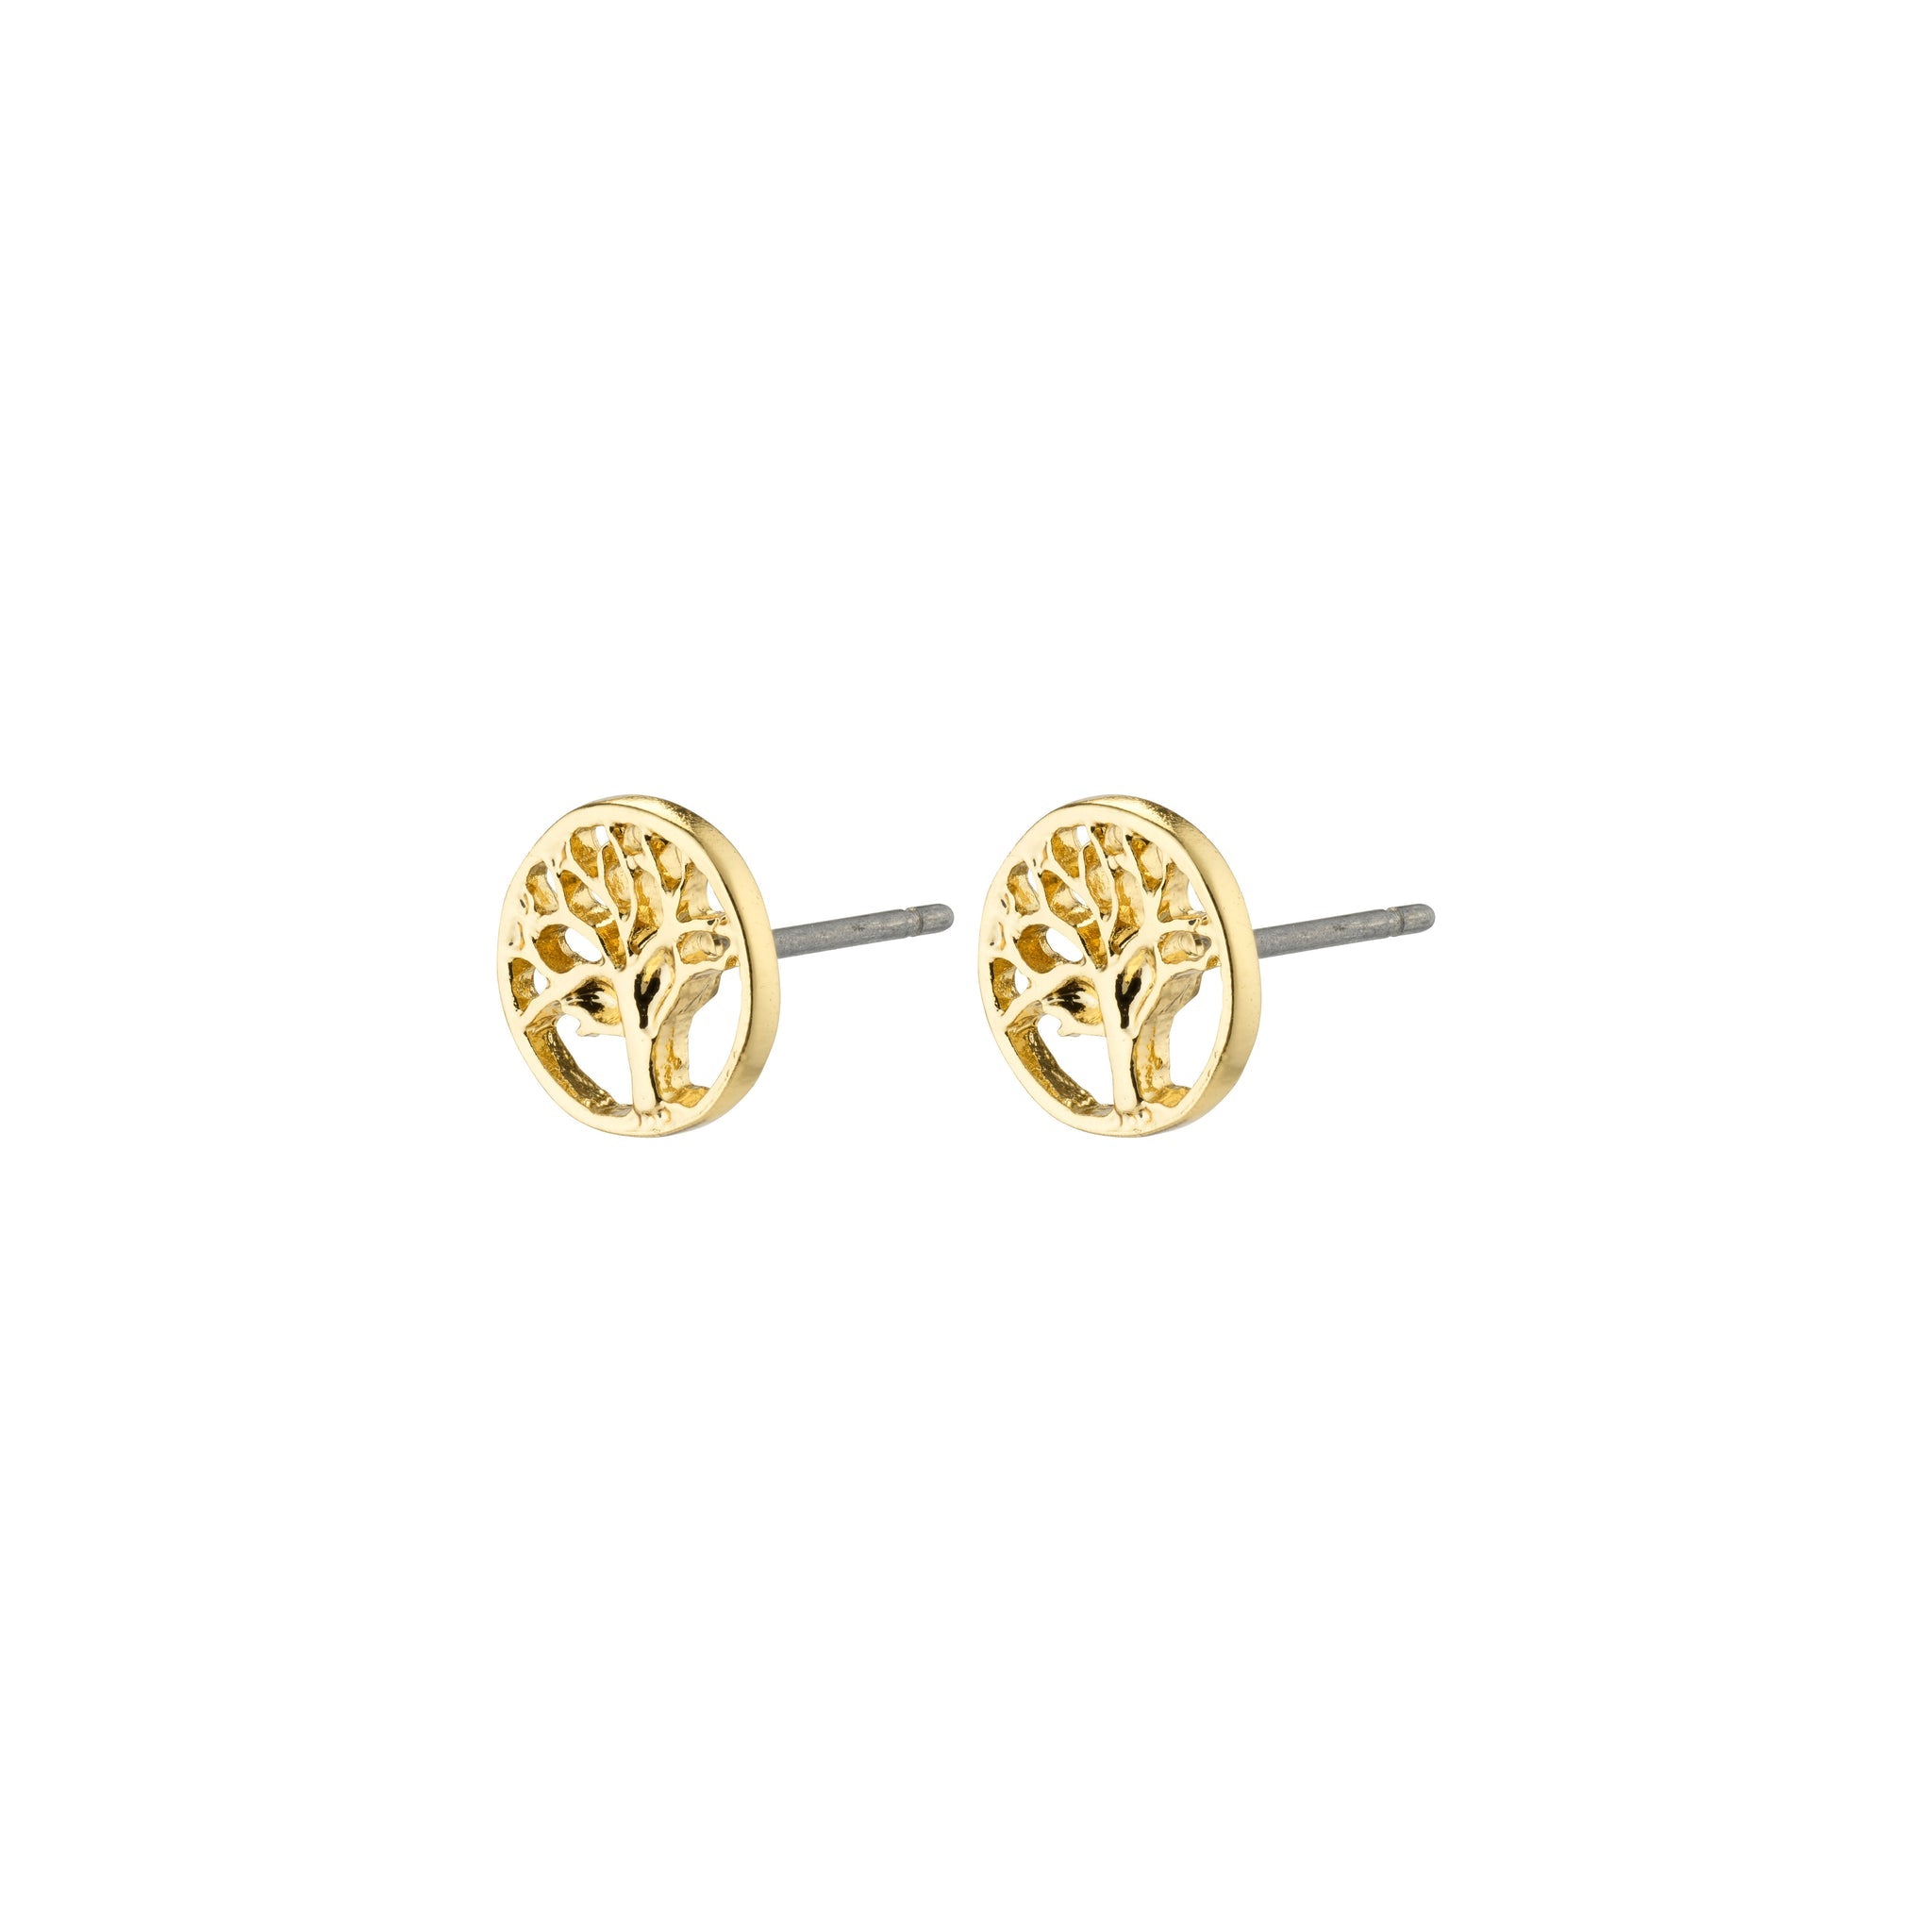 IBEN Recycled Tree of Life Earrings - Gold Plated